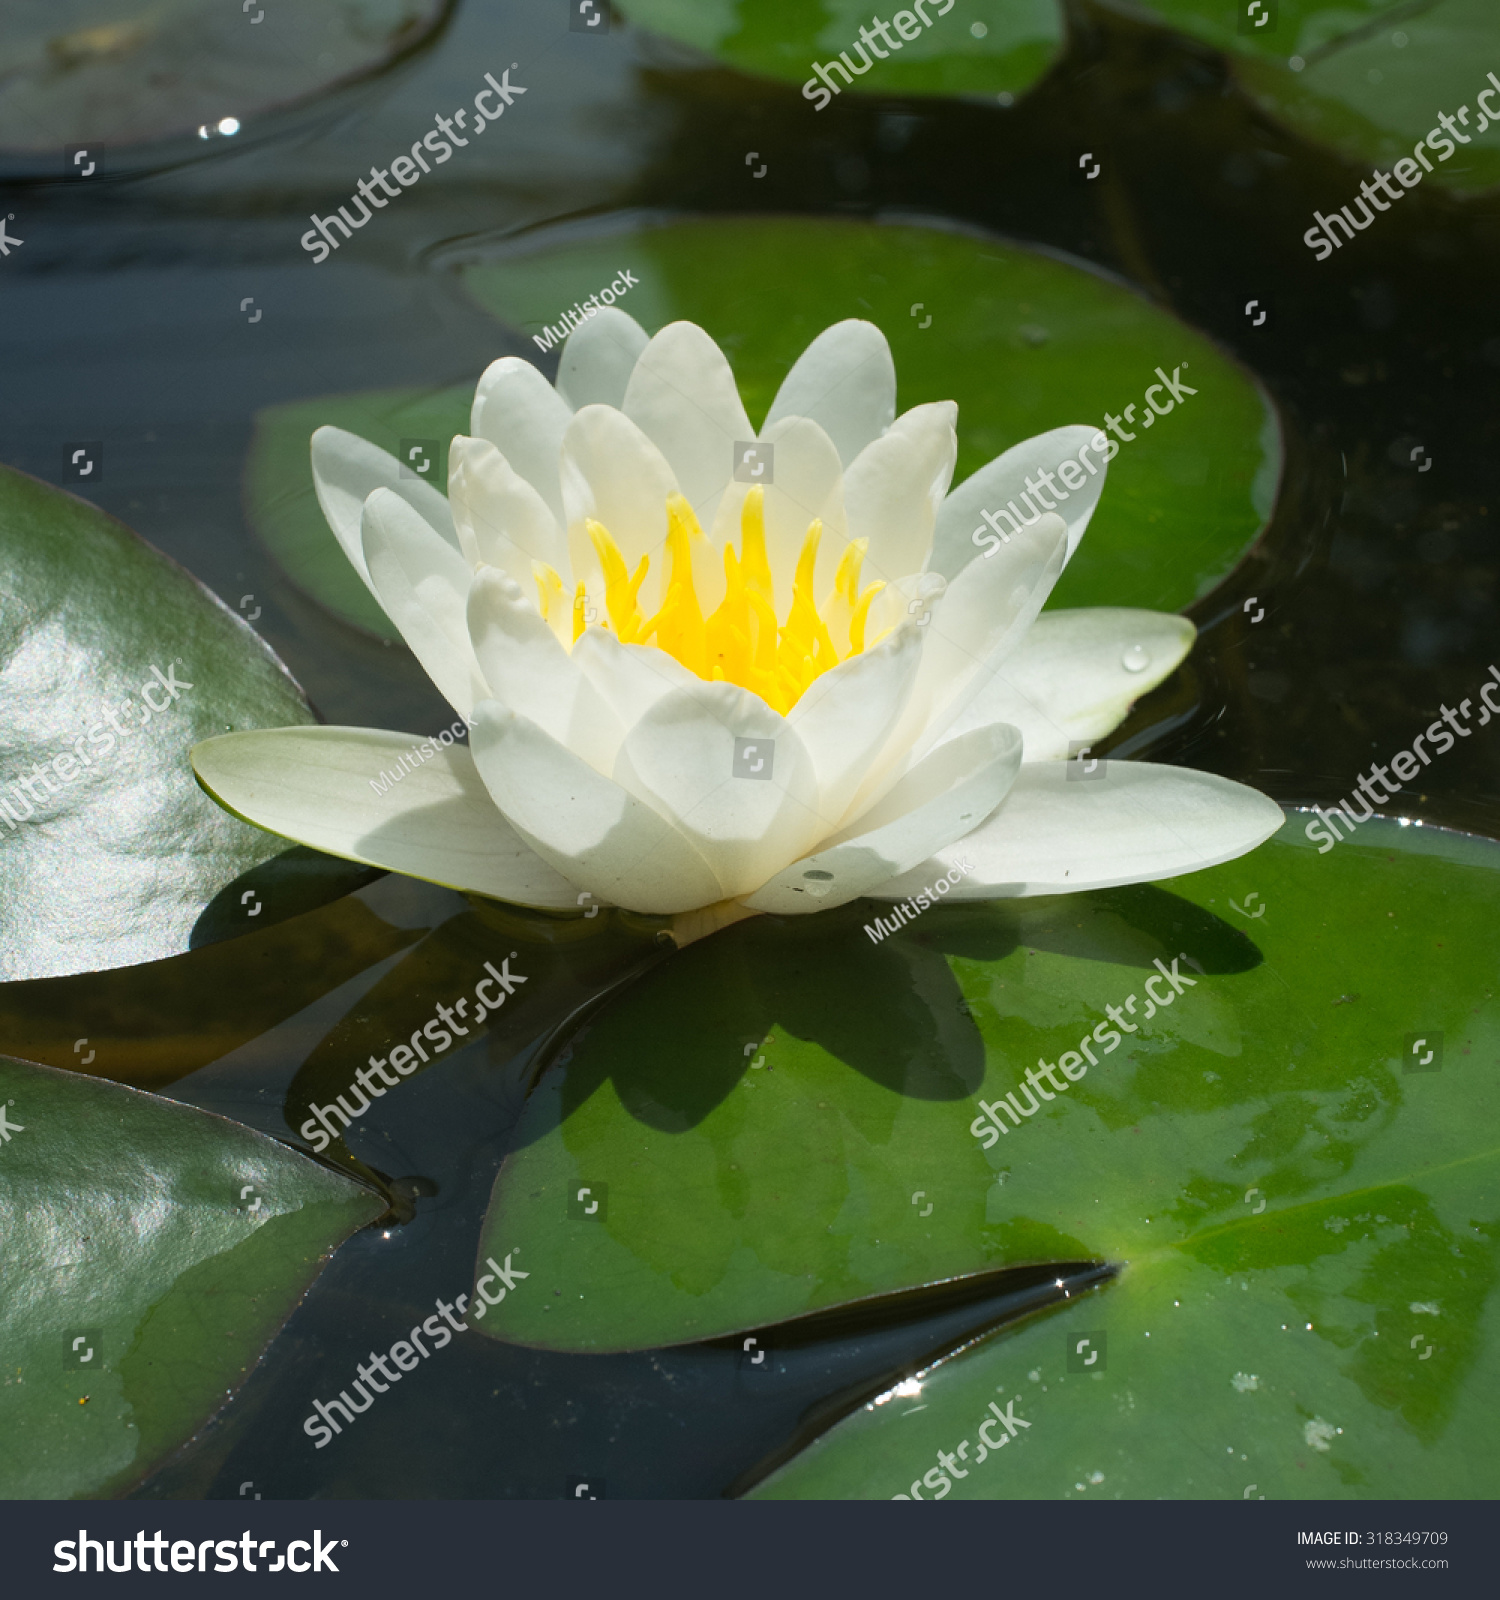 White Lily Floating On Water Stock Photo 318349709 - Shutterstock